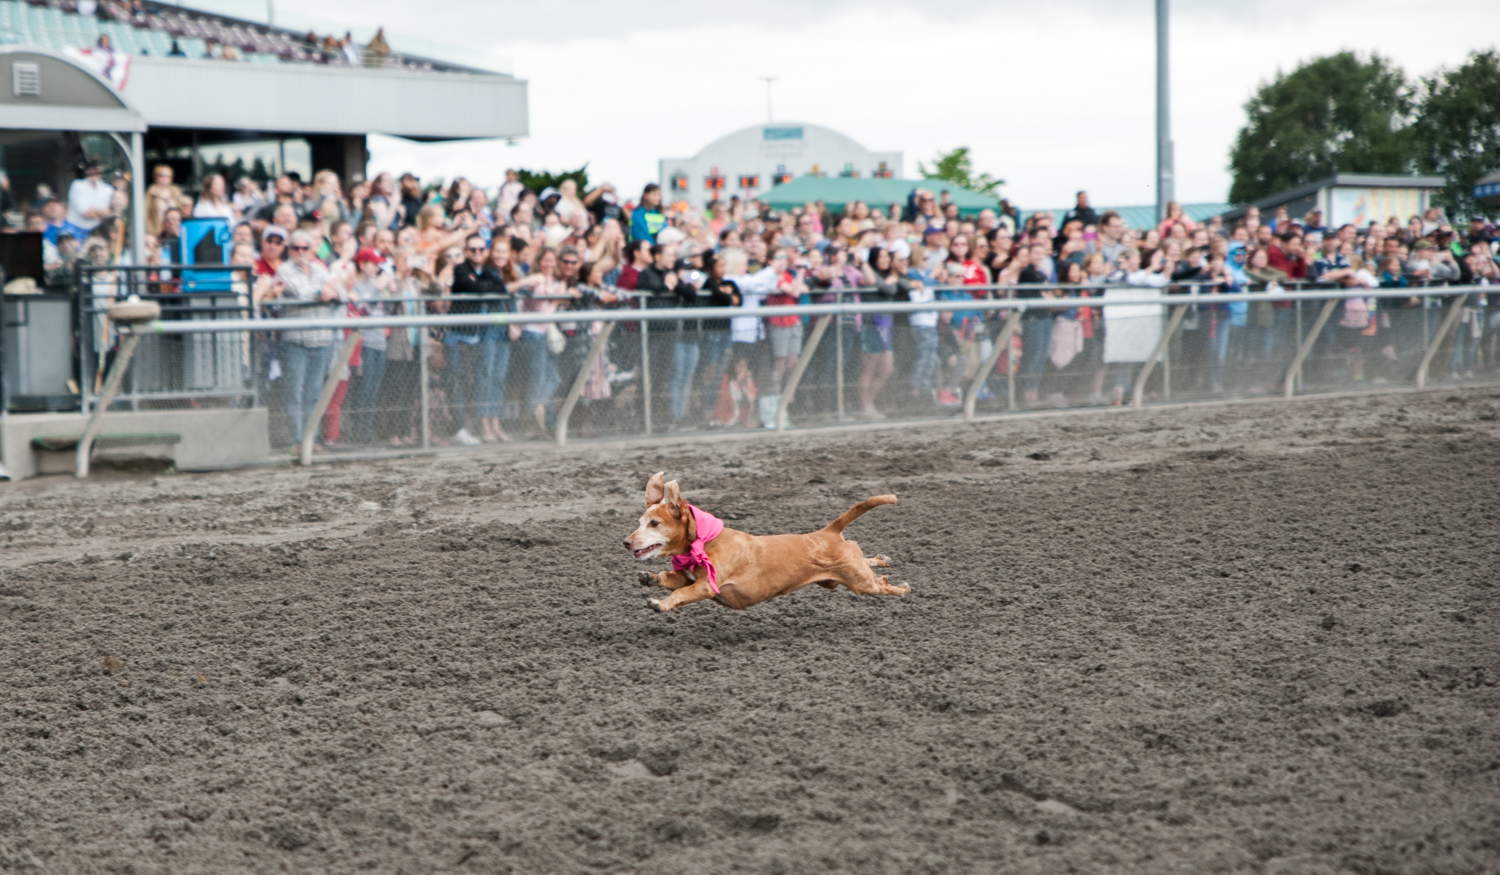 Photos: Hot dog! It's the Wiener Dog Races at Emerald Downs Racetrack | Seattle Refined